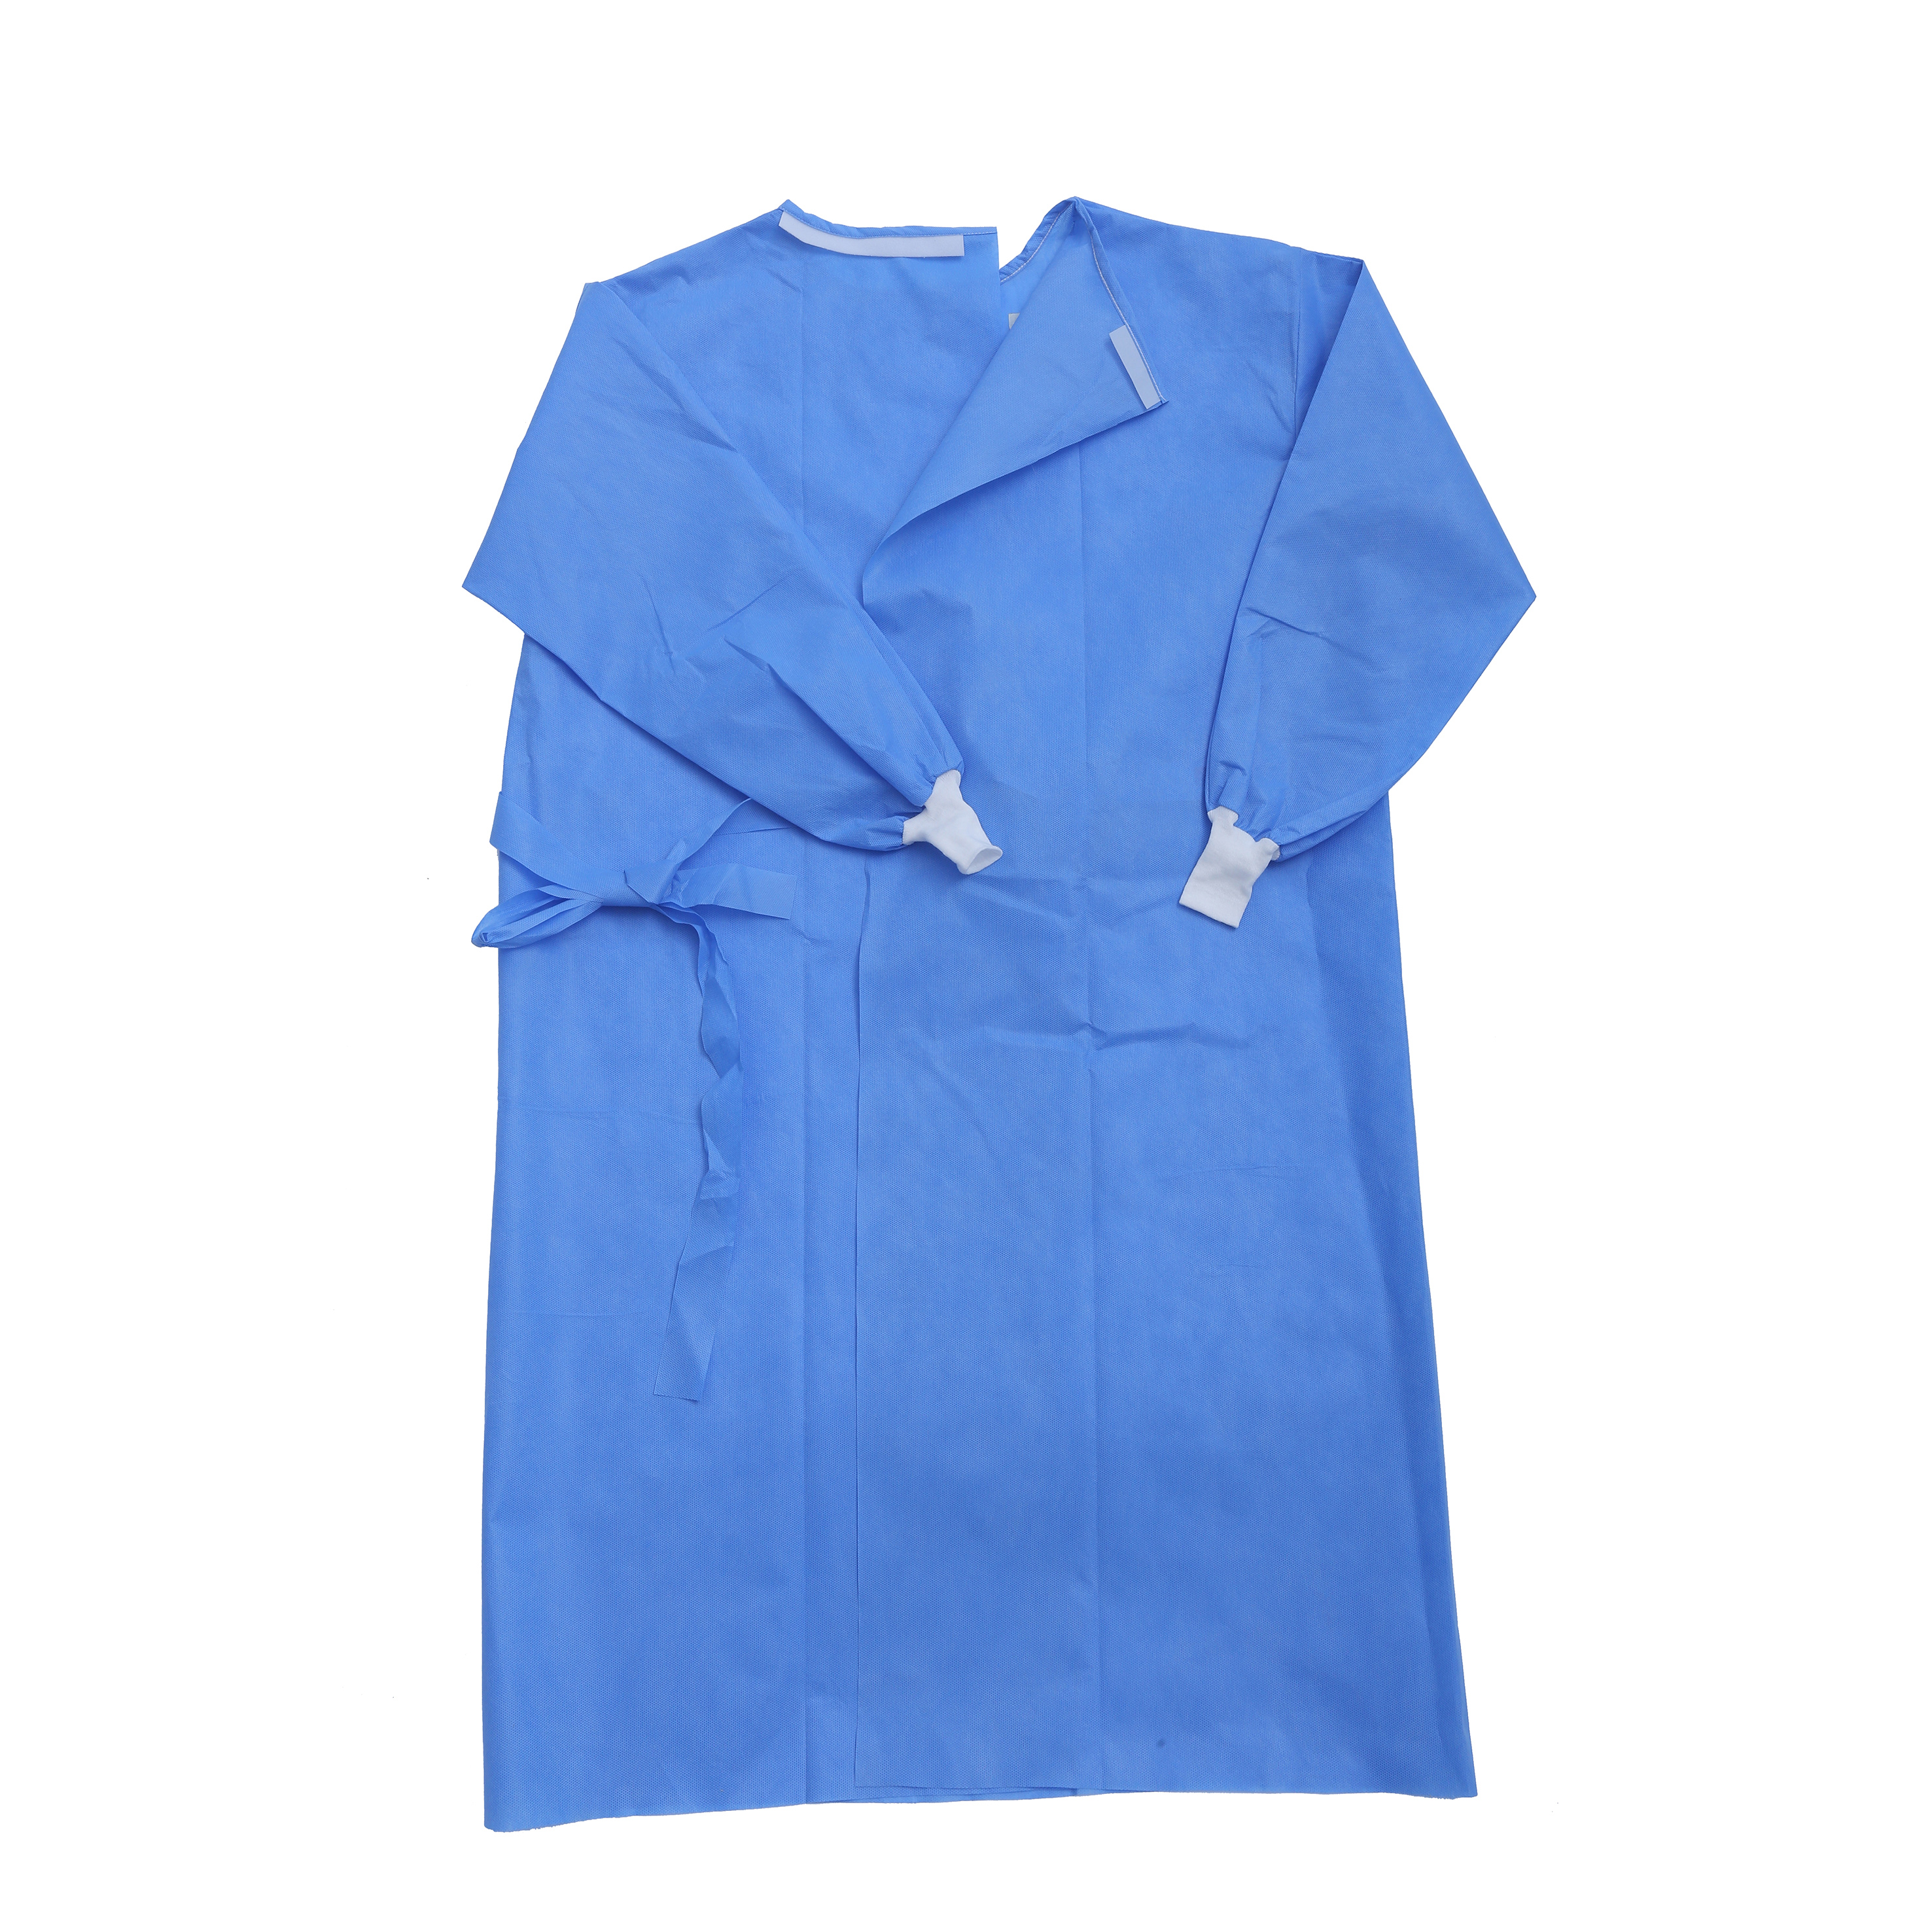 Factory making Inspection Service Yiwu - Hot Selling Disposable Isolation Gown Medical SMS Disposable Surgical Gown for Hospital – Sellers Union